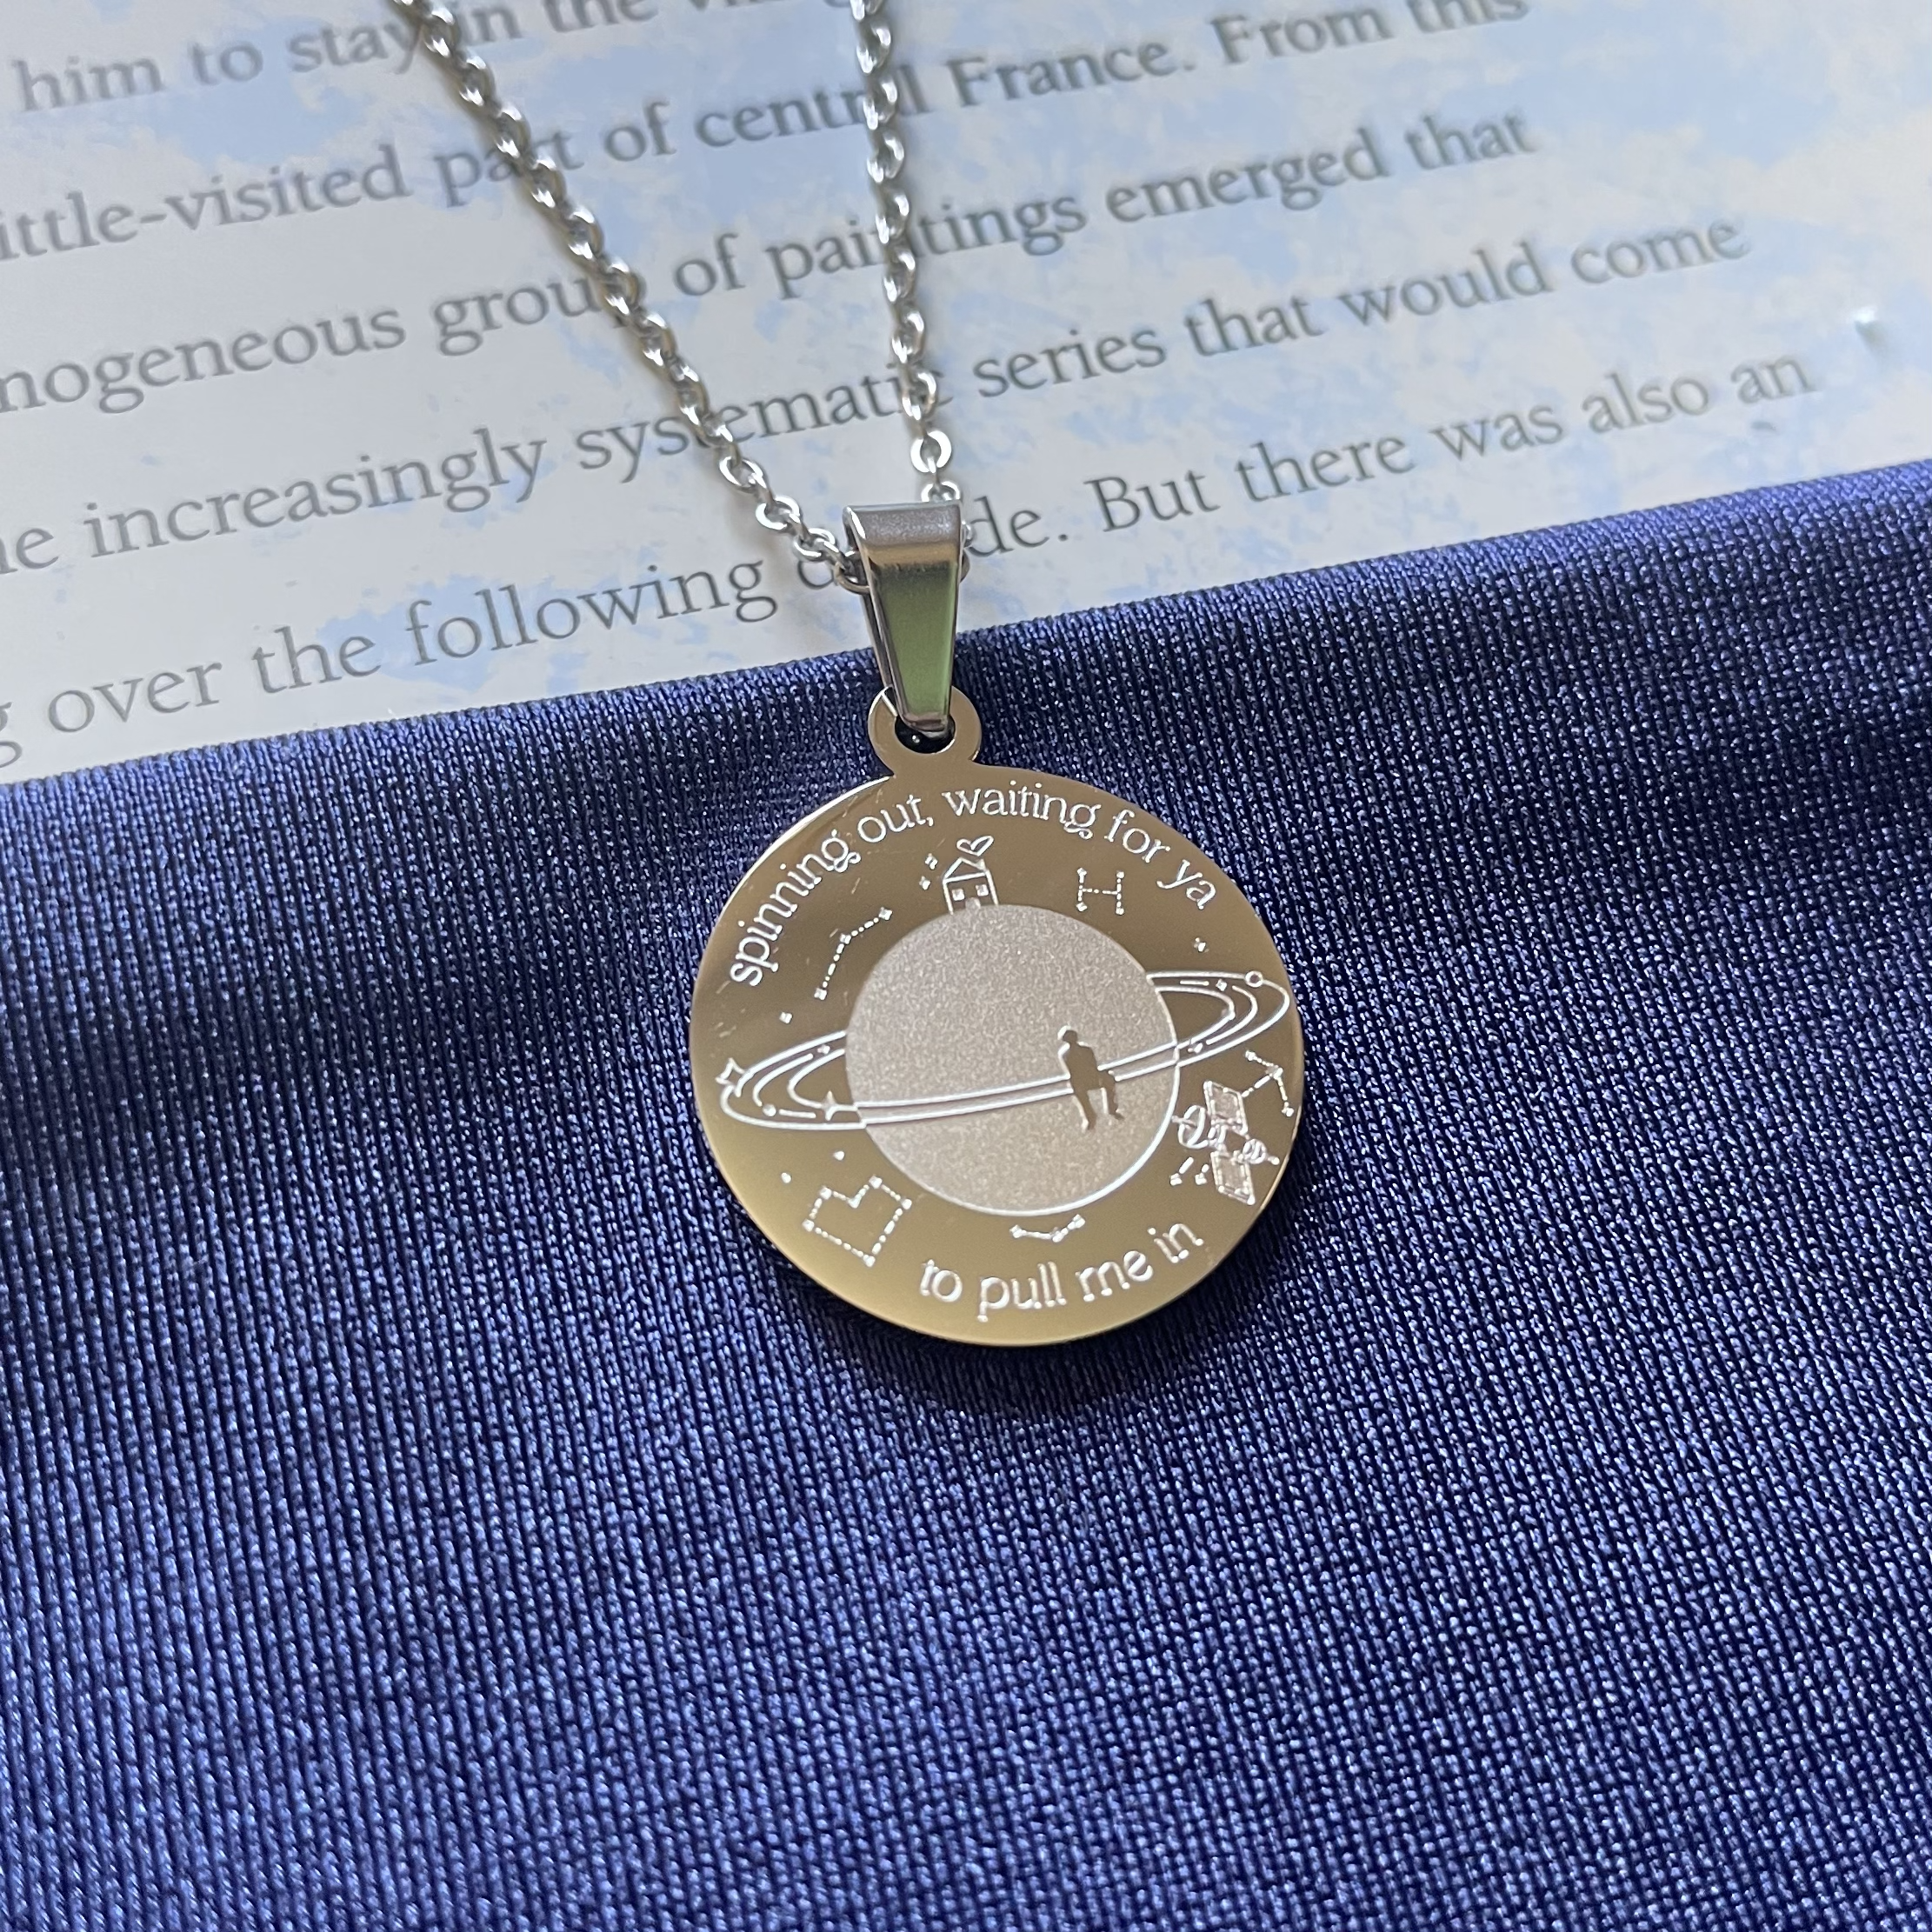 Shining for You Necklace Engraved Circle Chain Pendant Necklace 